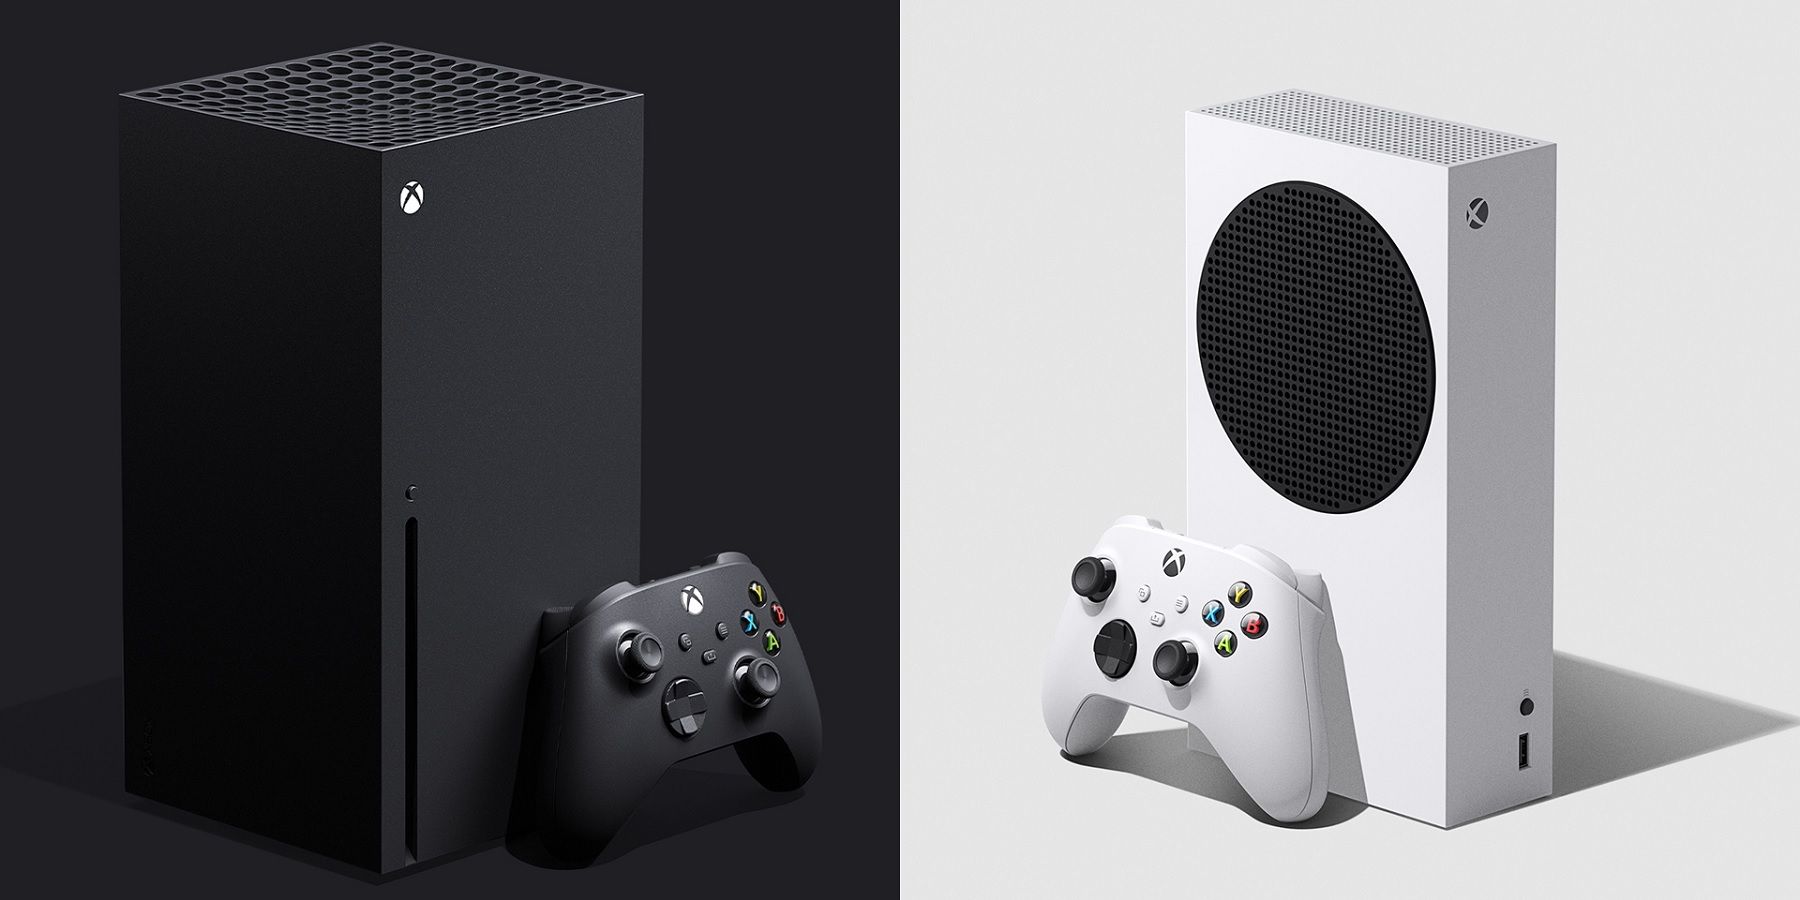 A side-by-side comparison between the Xbox Series X and Xbox Series S consoles.